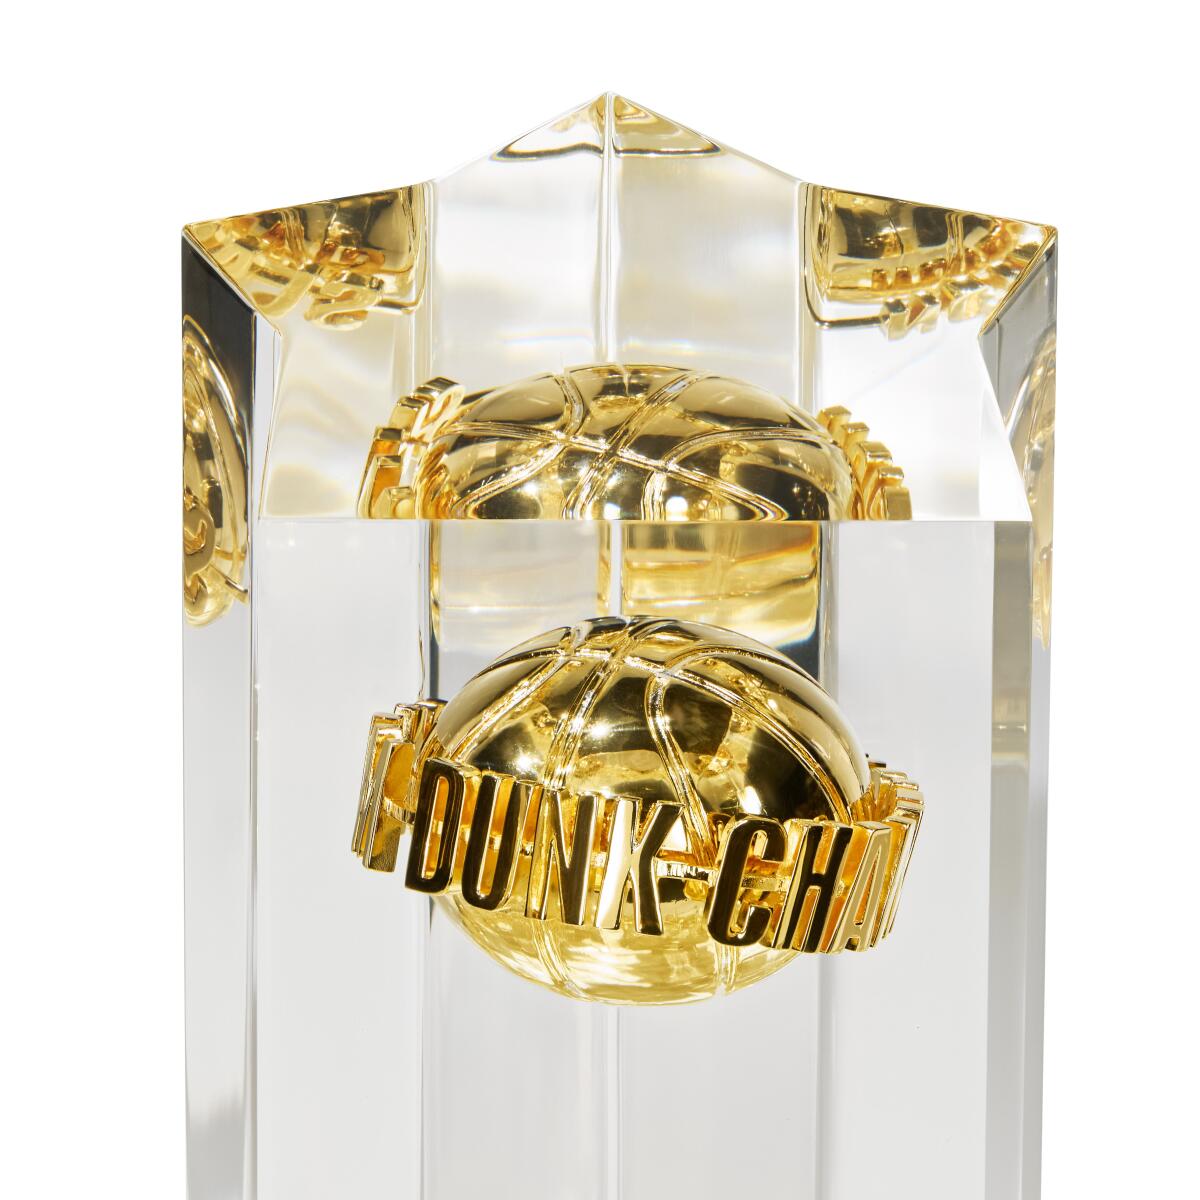 The All-Star slam dunk winner's trophy features a 24-karat basketball embedded in the crystal column.